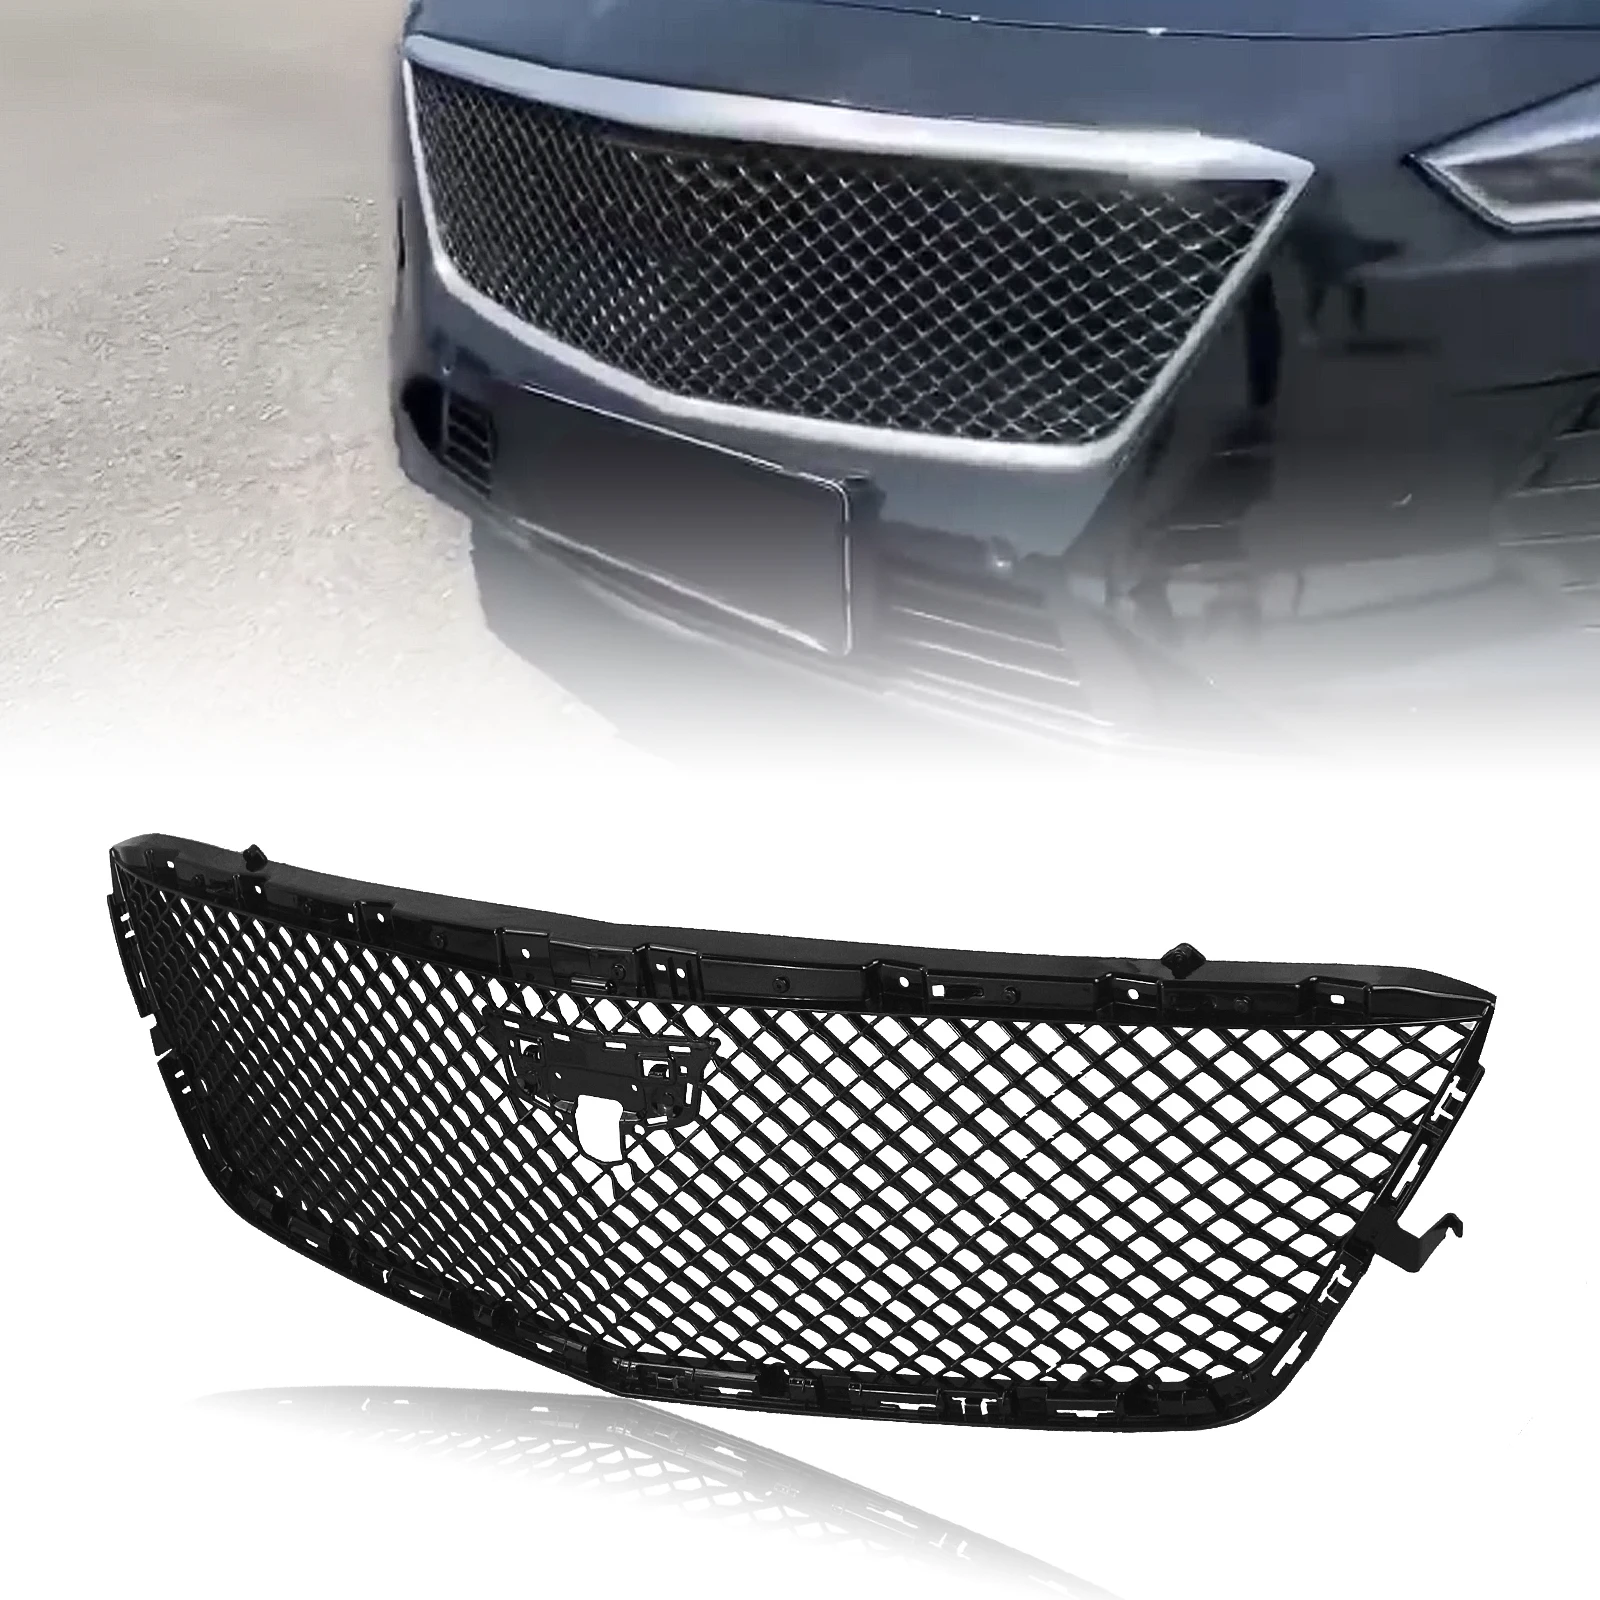 

Car Grill Front Grille Upper Replacement Bumper Hood Mesh Grid Auto Kit For Cadillac CT6 2019-2020 Sport V Honeycomb Style